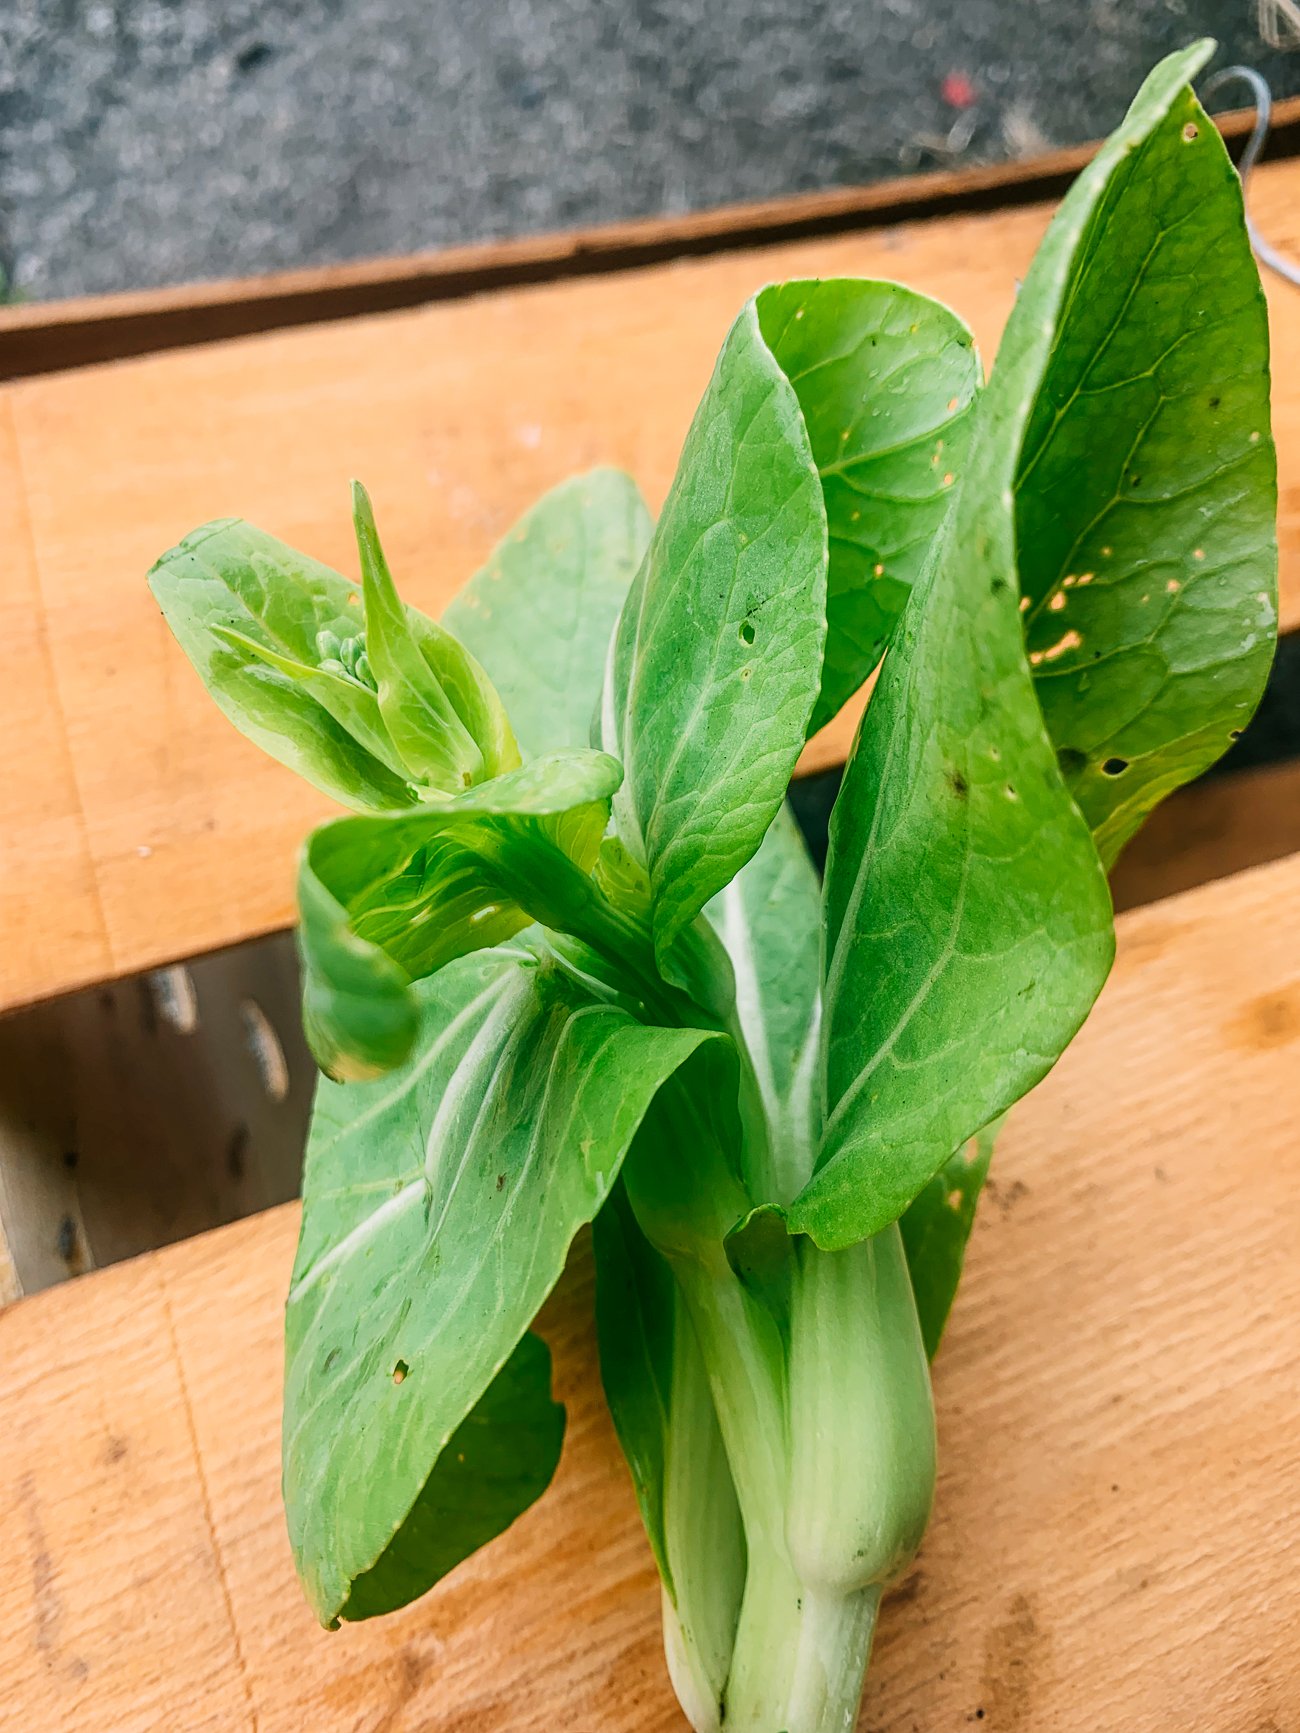 bok choy that has bolted but is still edible